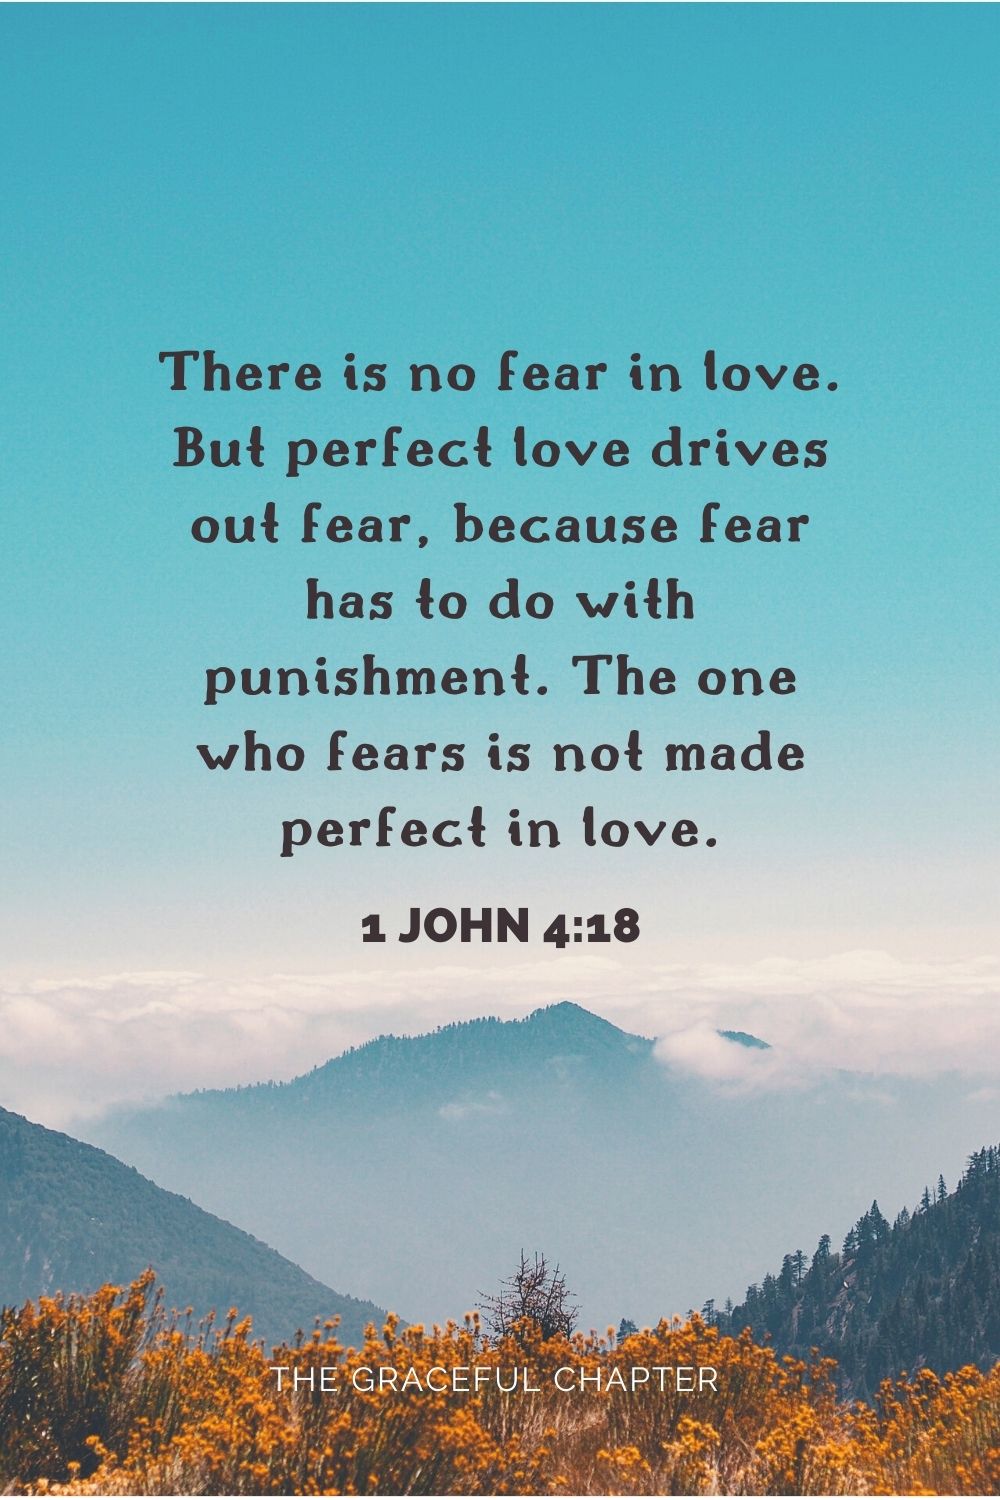 There is no fear in love. But perfect love drives out fear, because fear has to do with punishment. The one who fears is not made perfect in love. 1 John 4:18